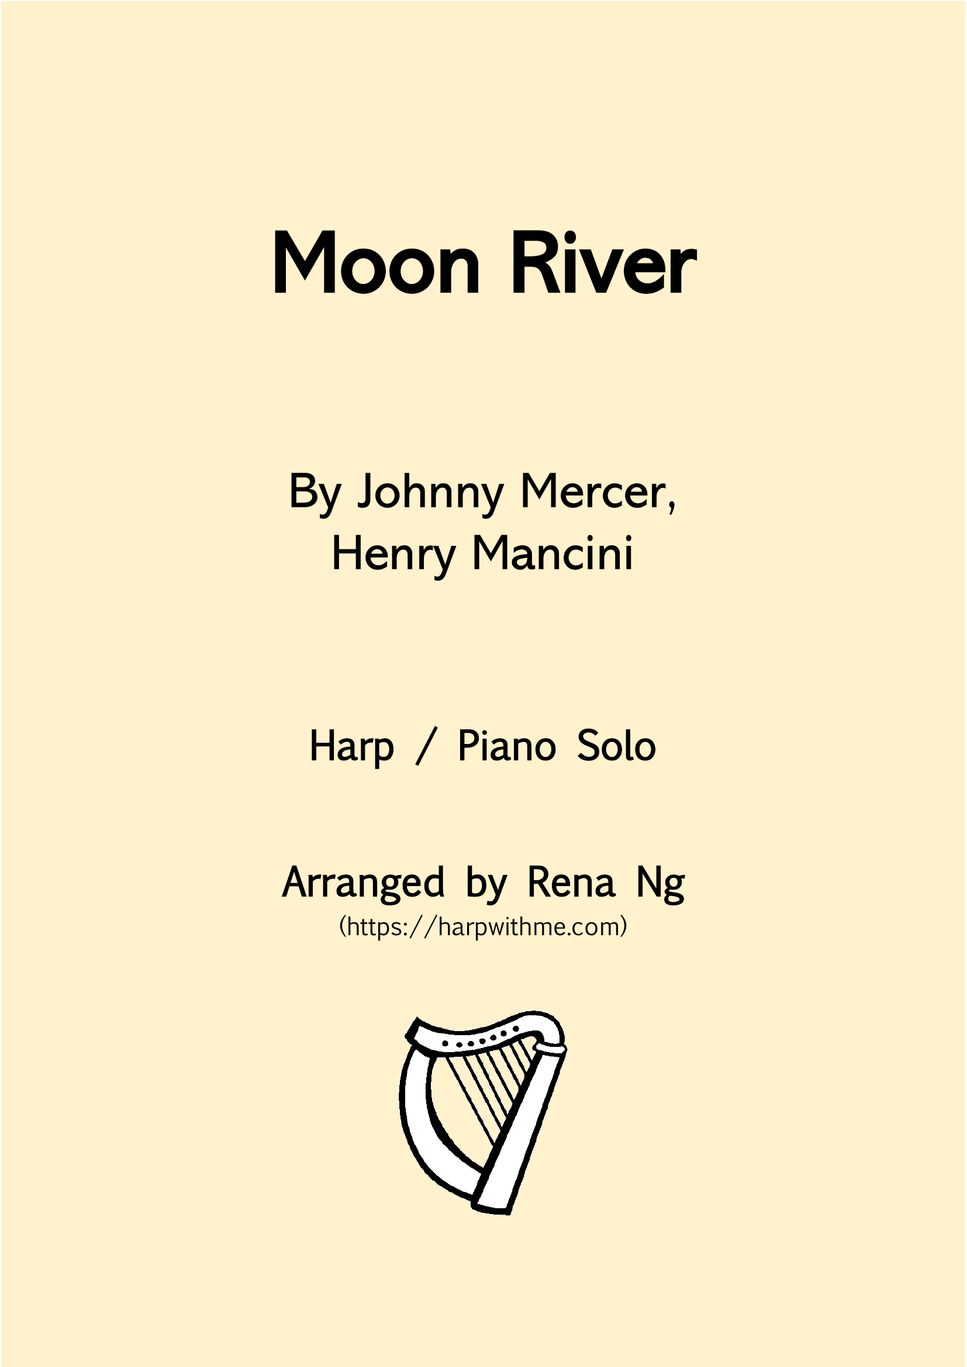 Andy Williams, Henry Mancini - Moon River (Harp Solo) by Harp With Me